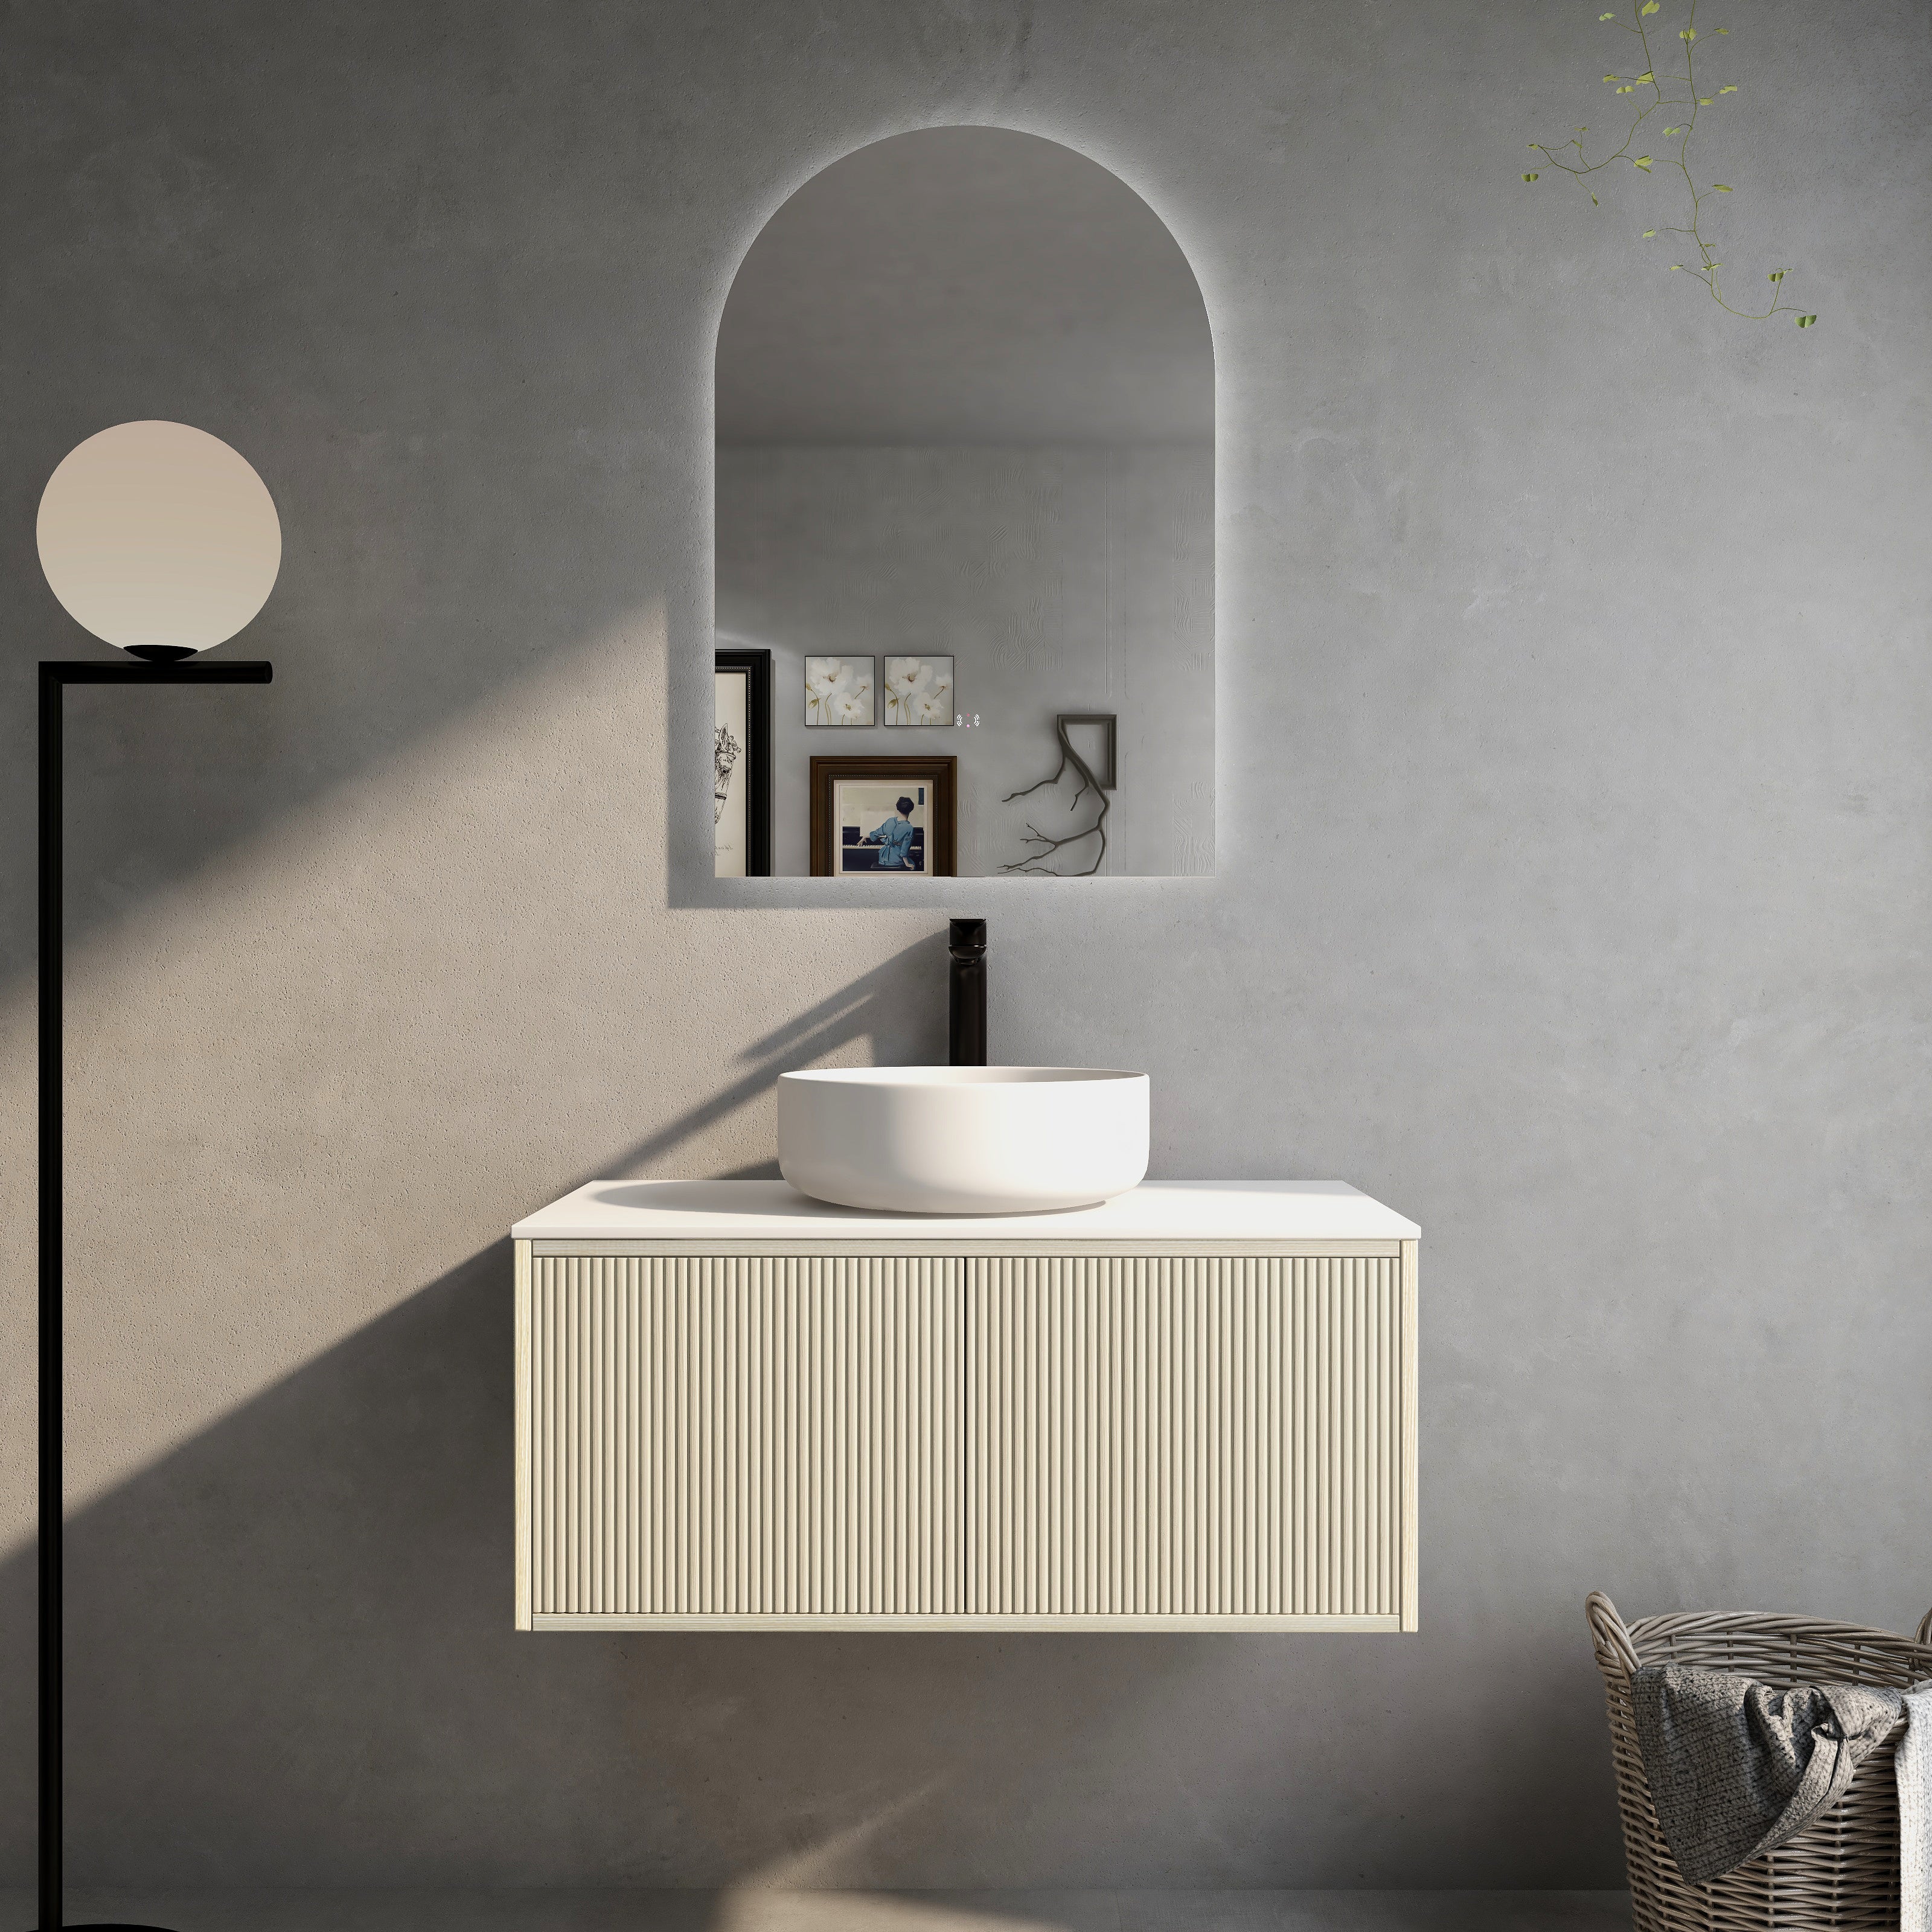 CETO BELLEVUE COASTAL OAK 900MM SINGLE BOWL WALL HUNG VANITY (AVAILABLE IN LEFT HAND DRAWER AND RIGHT HAND DRAWER)